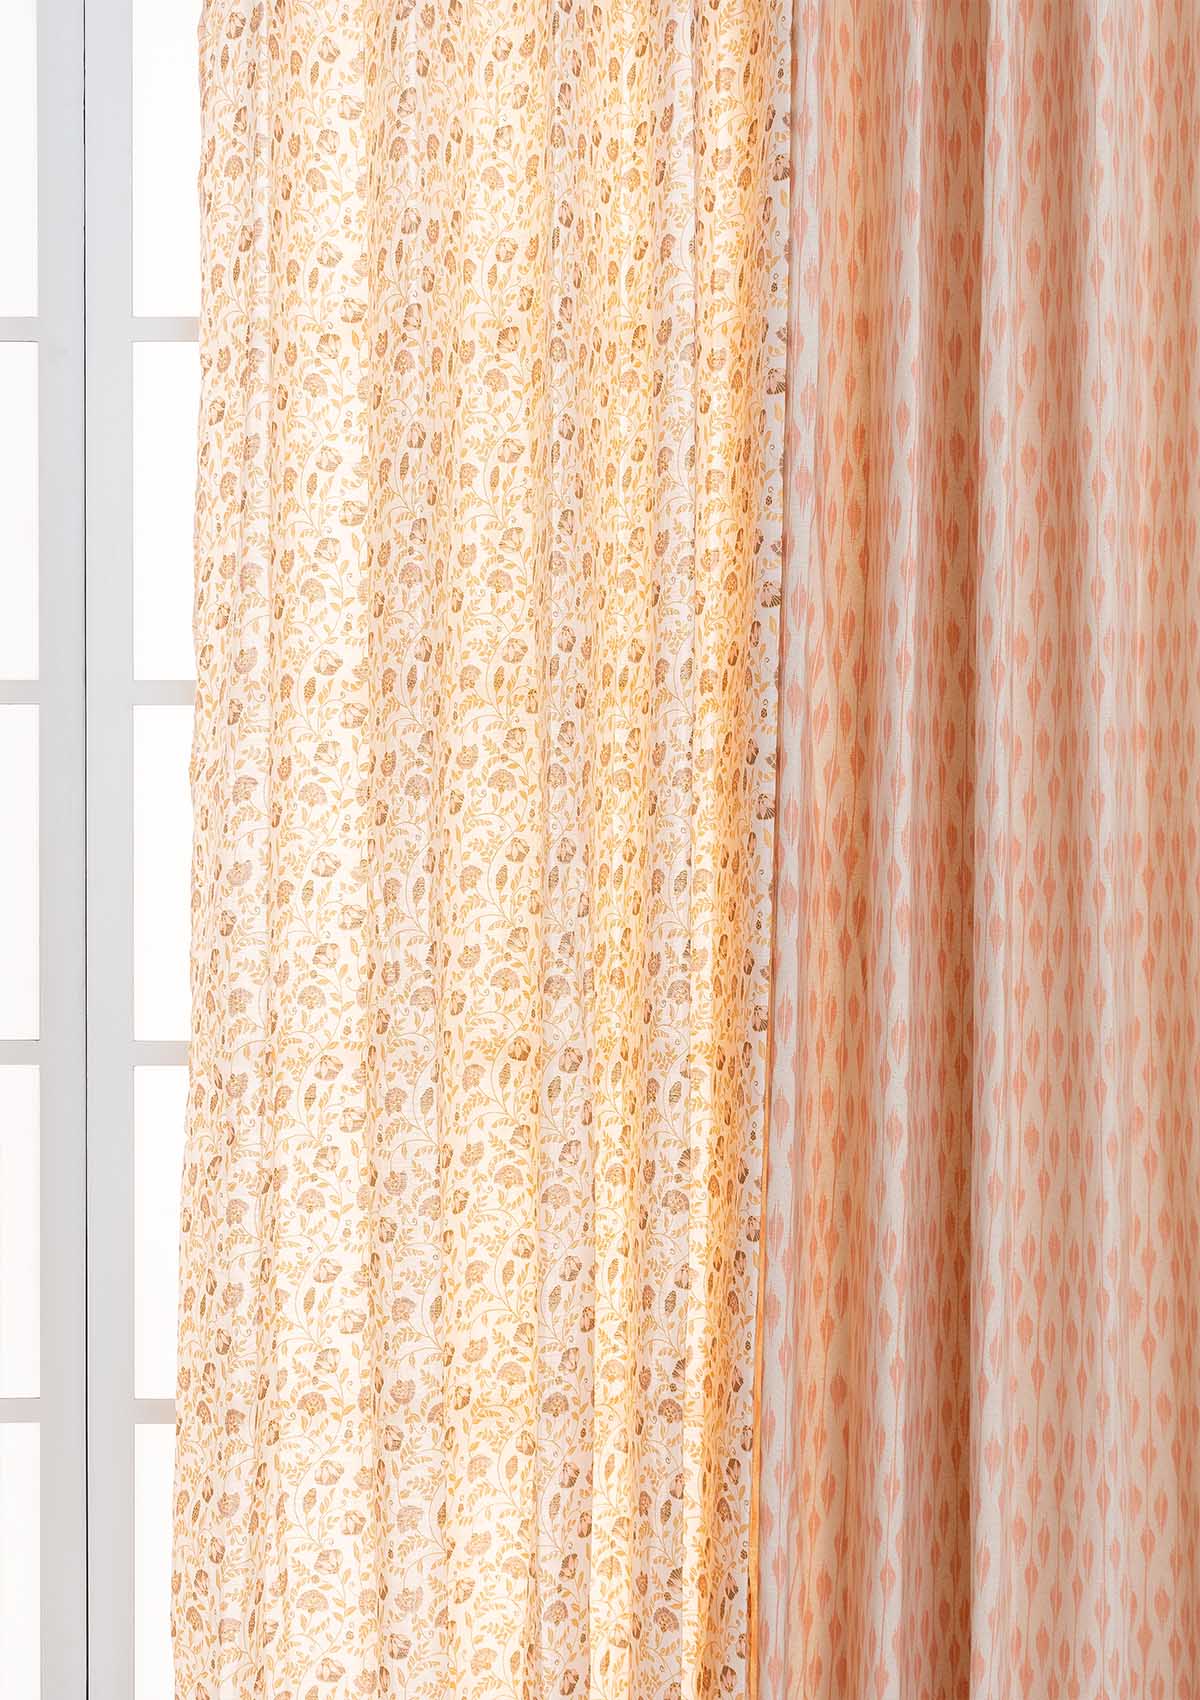 Chenab with Calico Sheer Set of 4 Combo Cotton Curtain  - Beige